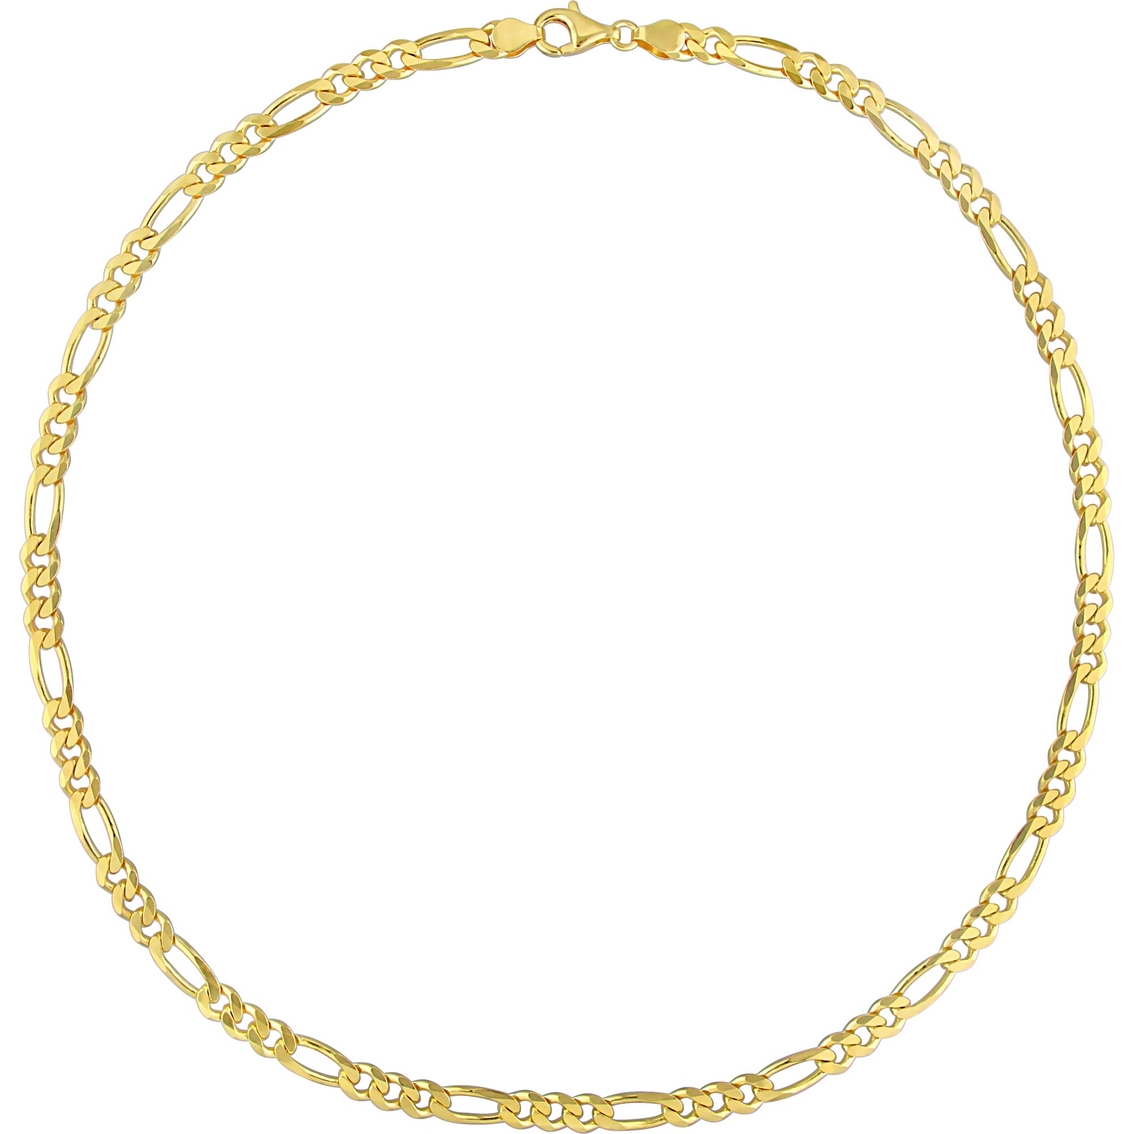 Sofia B. 18K Gold Over Sterling Silver 5.5mm Figaro Chain Necklace - Image 3 of 4